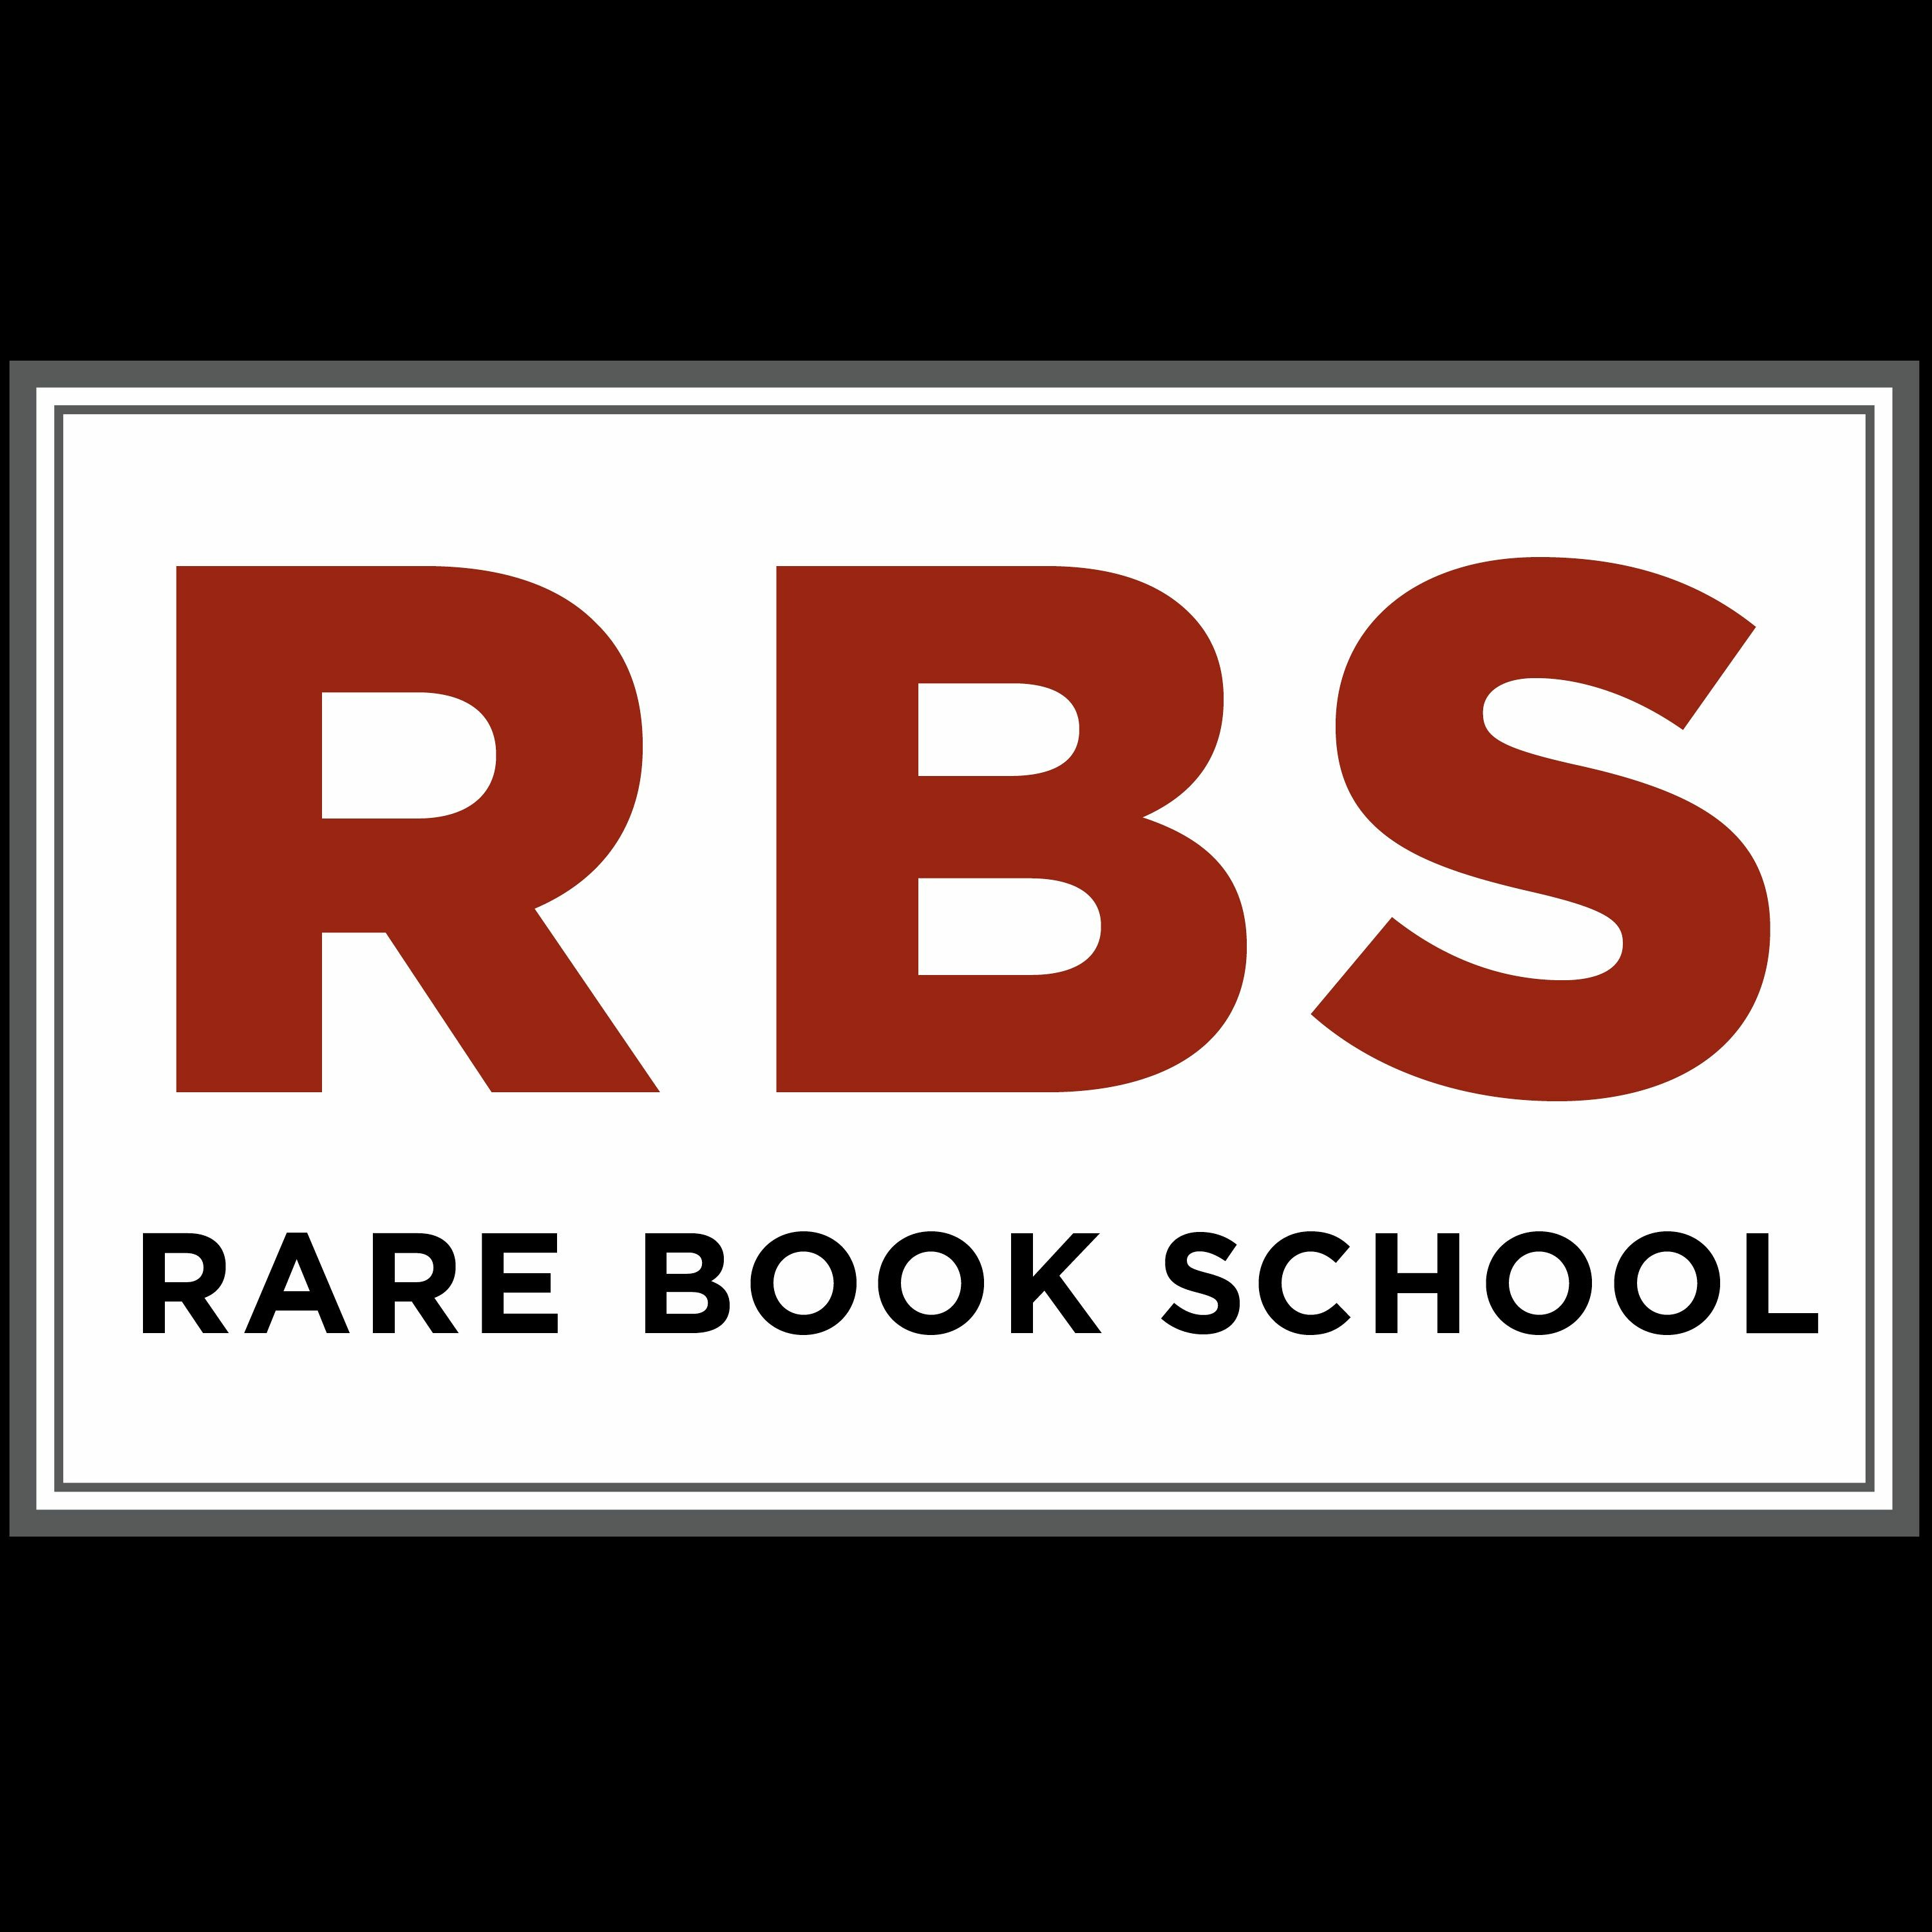 Belanger, Terry - ”Ourselves Observed: Education for Rare Books (With Bells and Whistles): III”